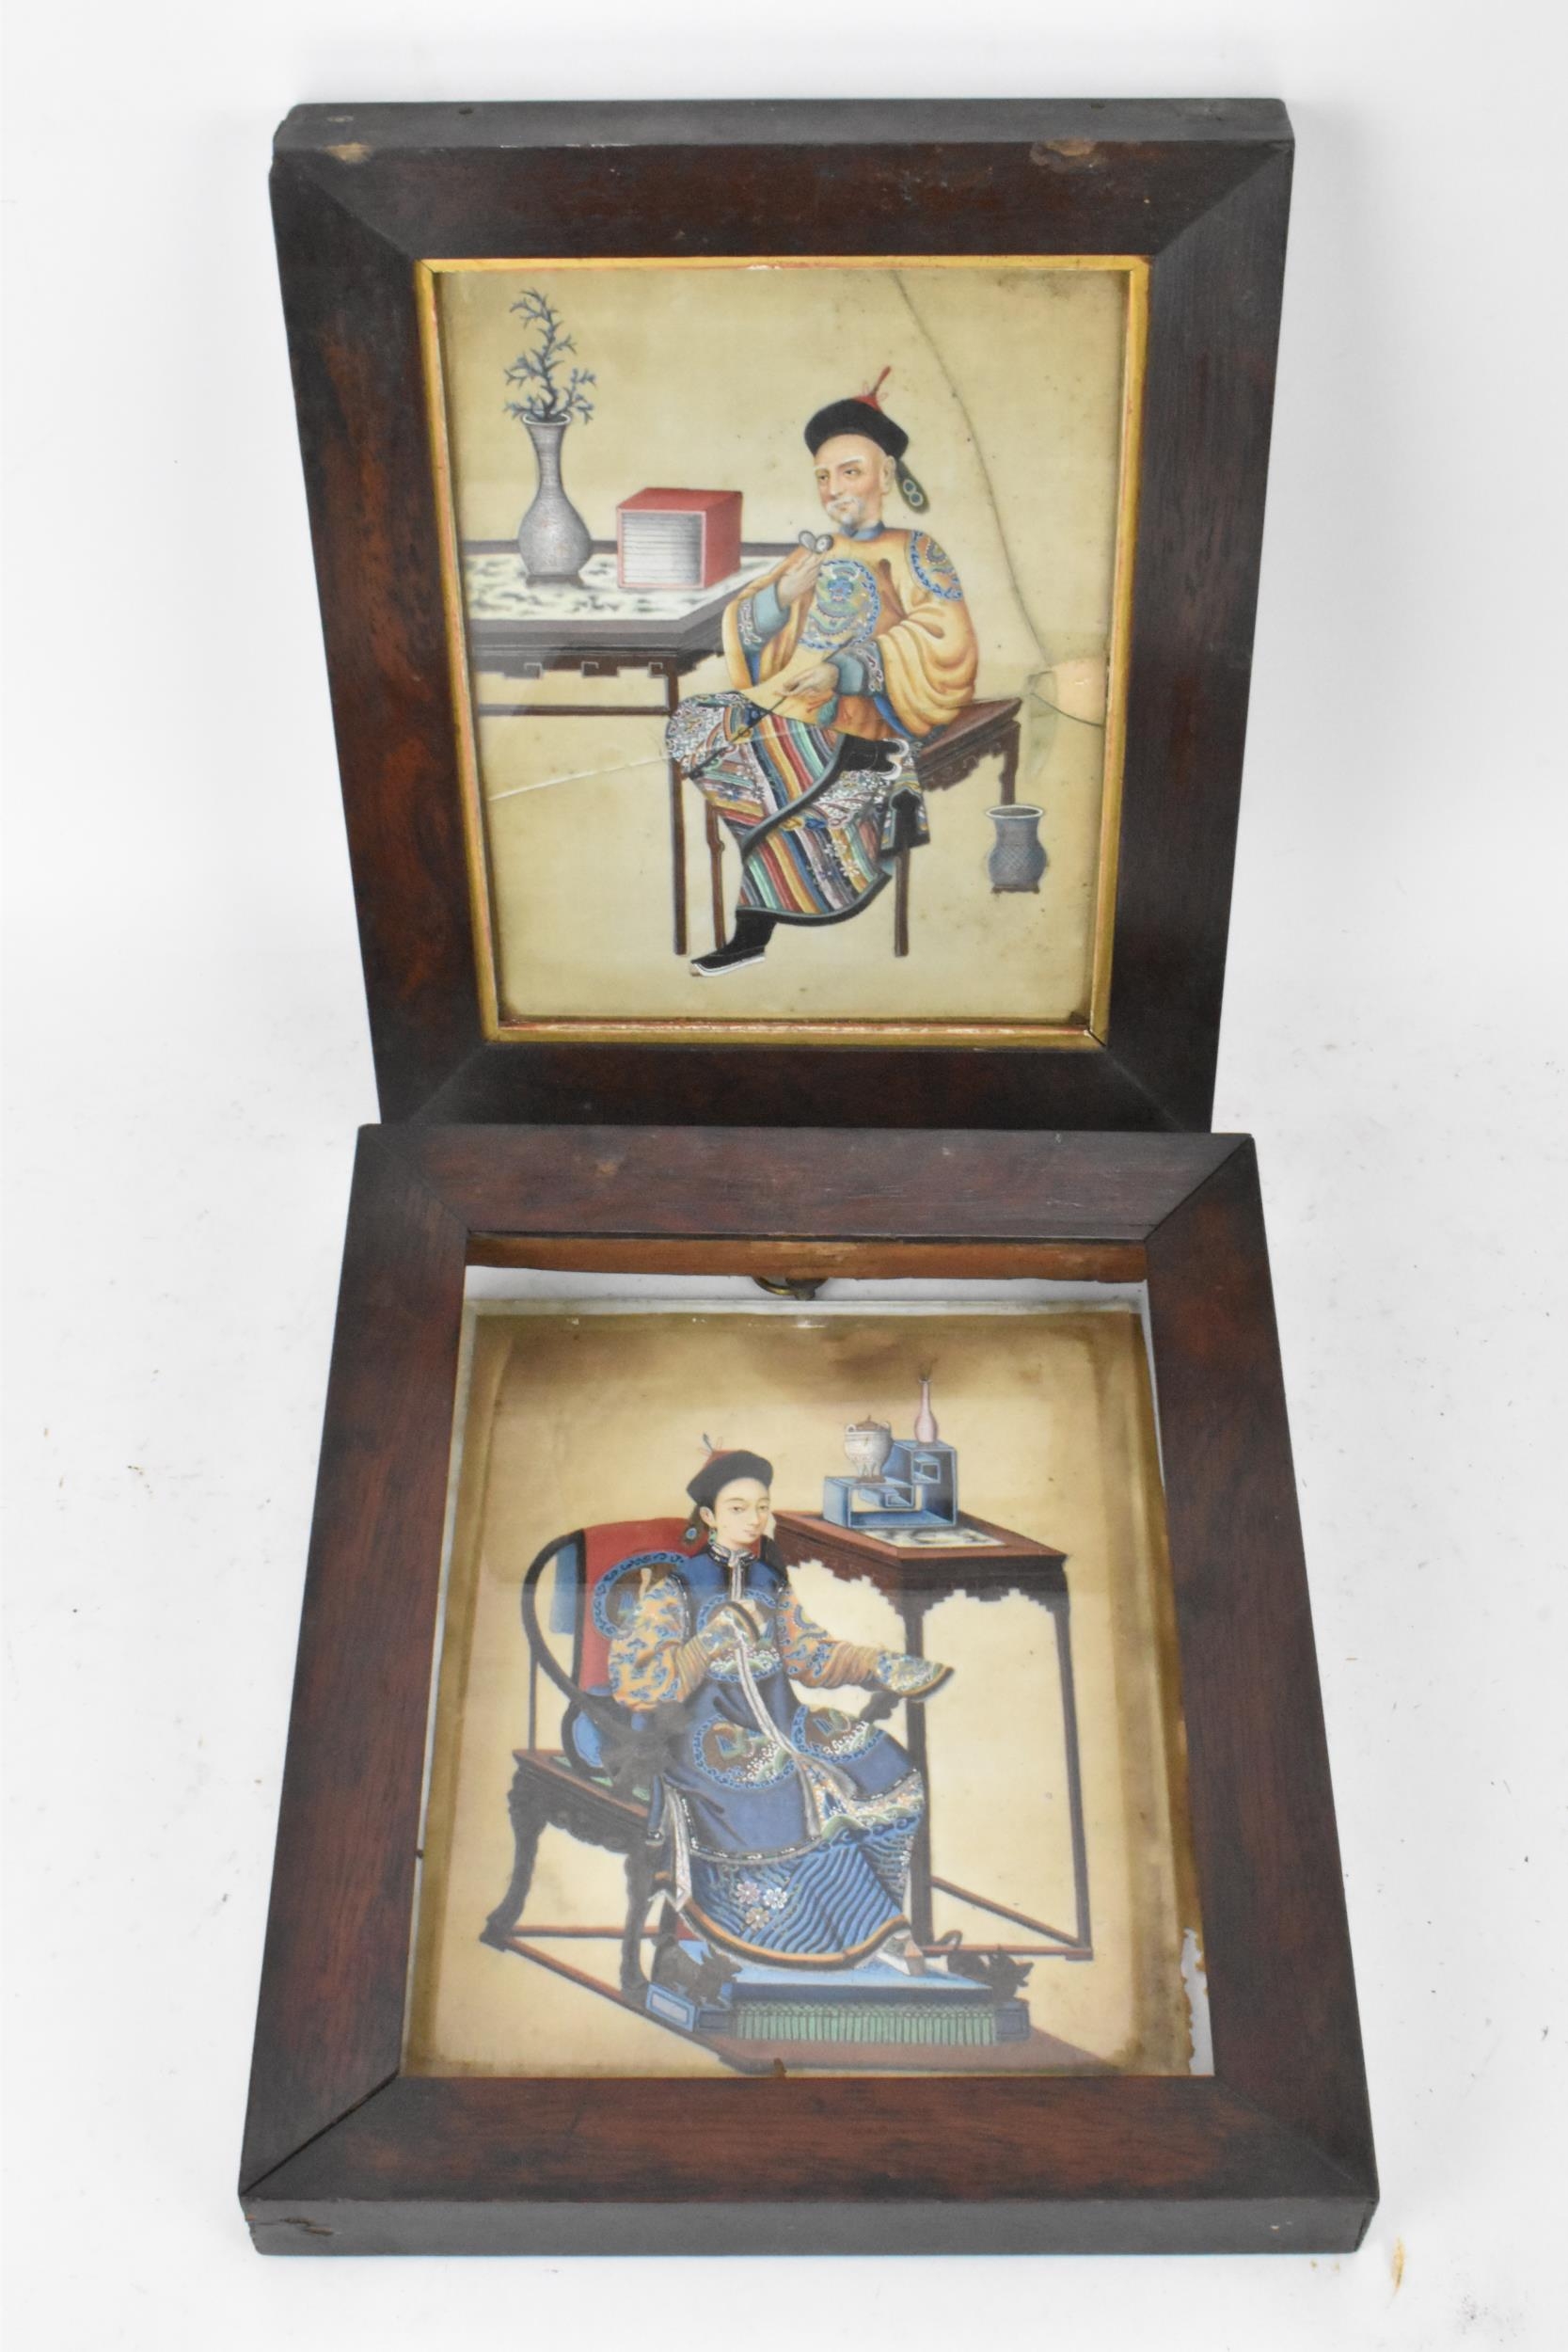 Two Chinese export late Qing dynasty watercolours on rice paper paintings depicted a seated